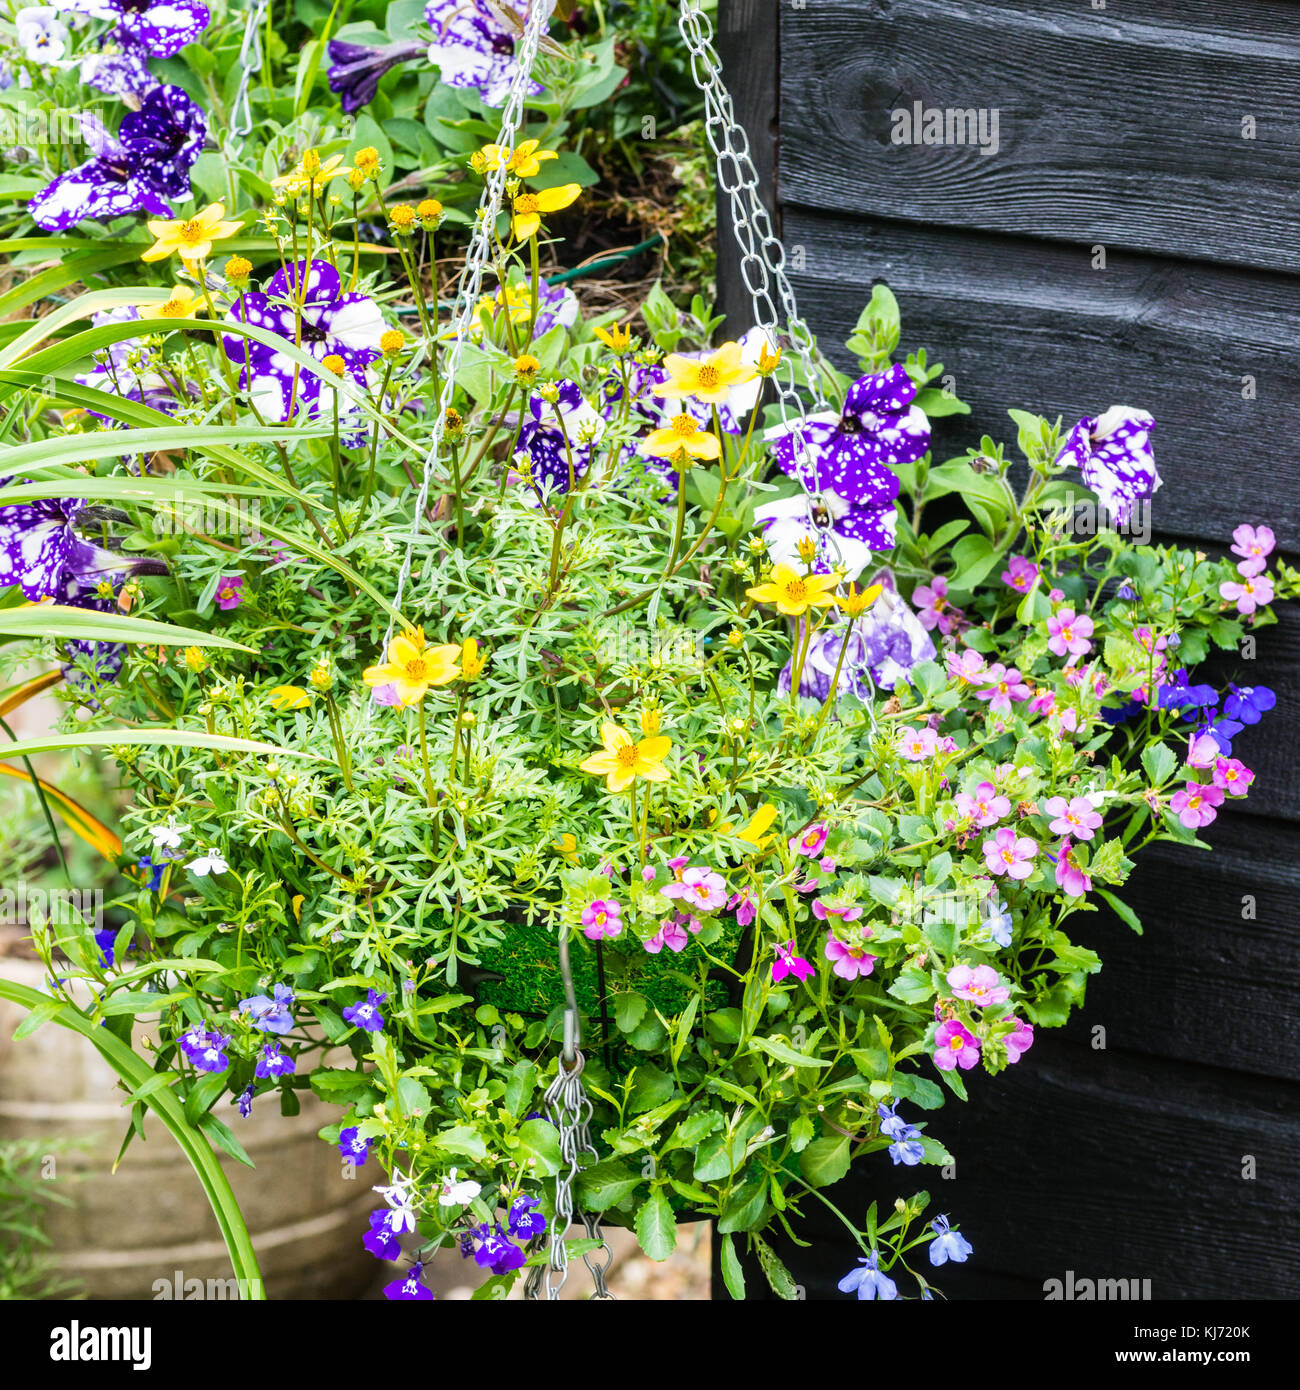 A shot of a colourful hanging basket. Stock Photo